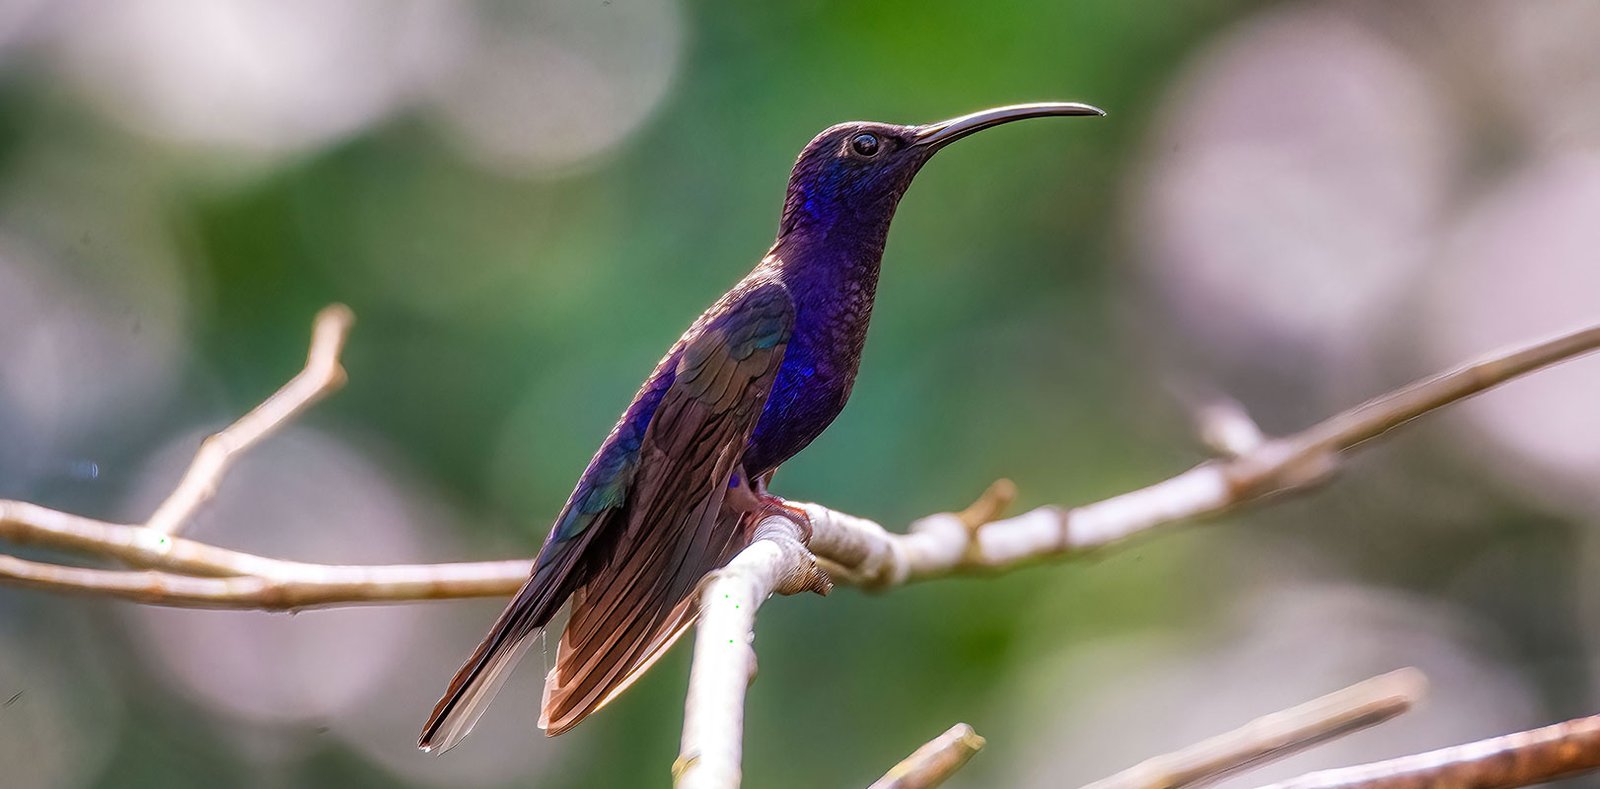 The Violet Sabrewing Hummingbird spotted during our San Ignacio One-Day Private Birdwatching Tours.